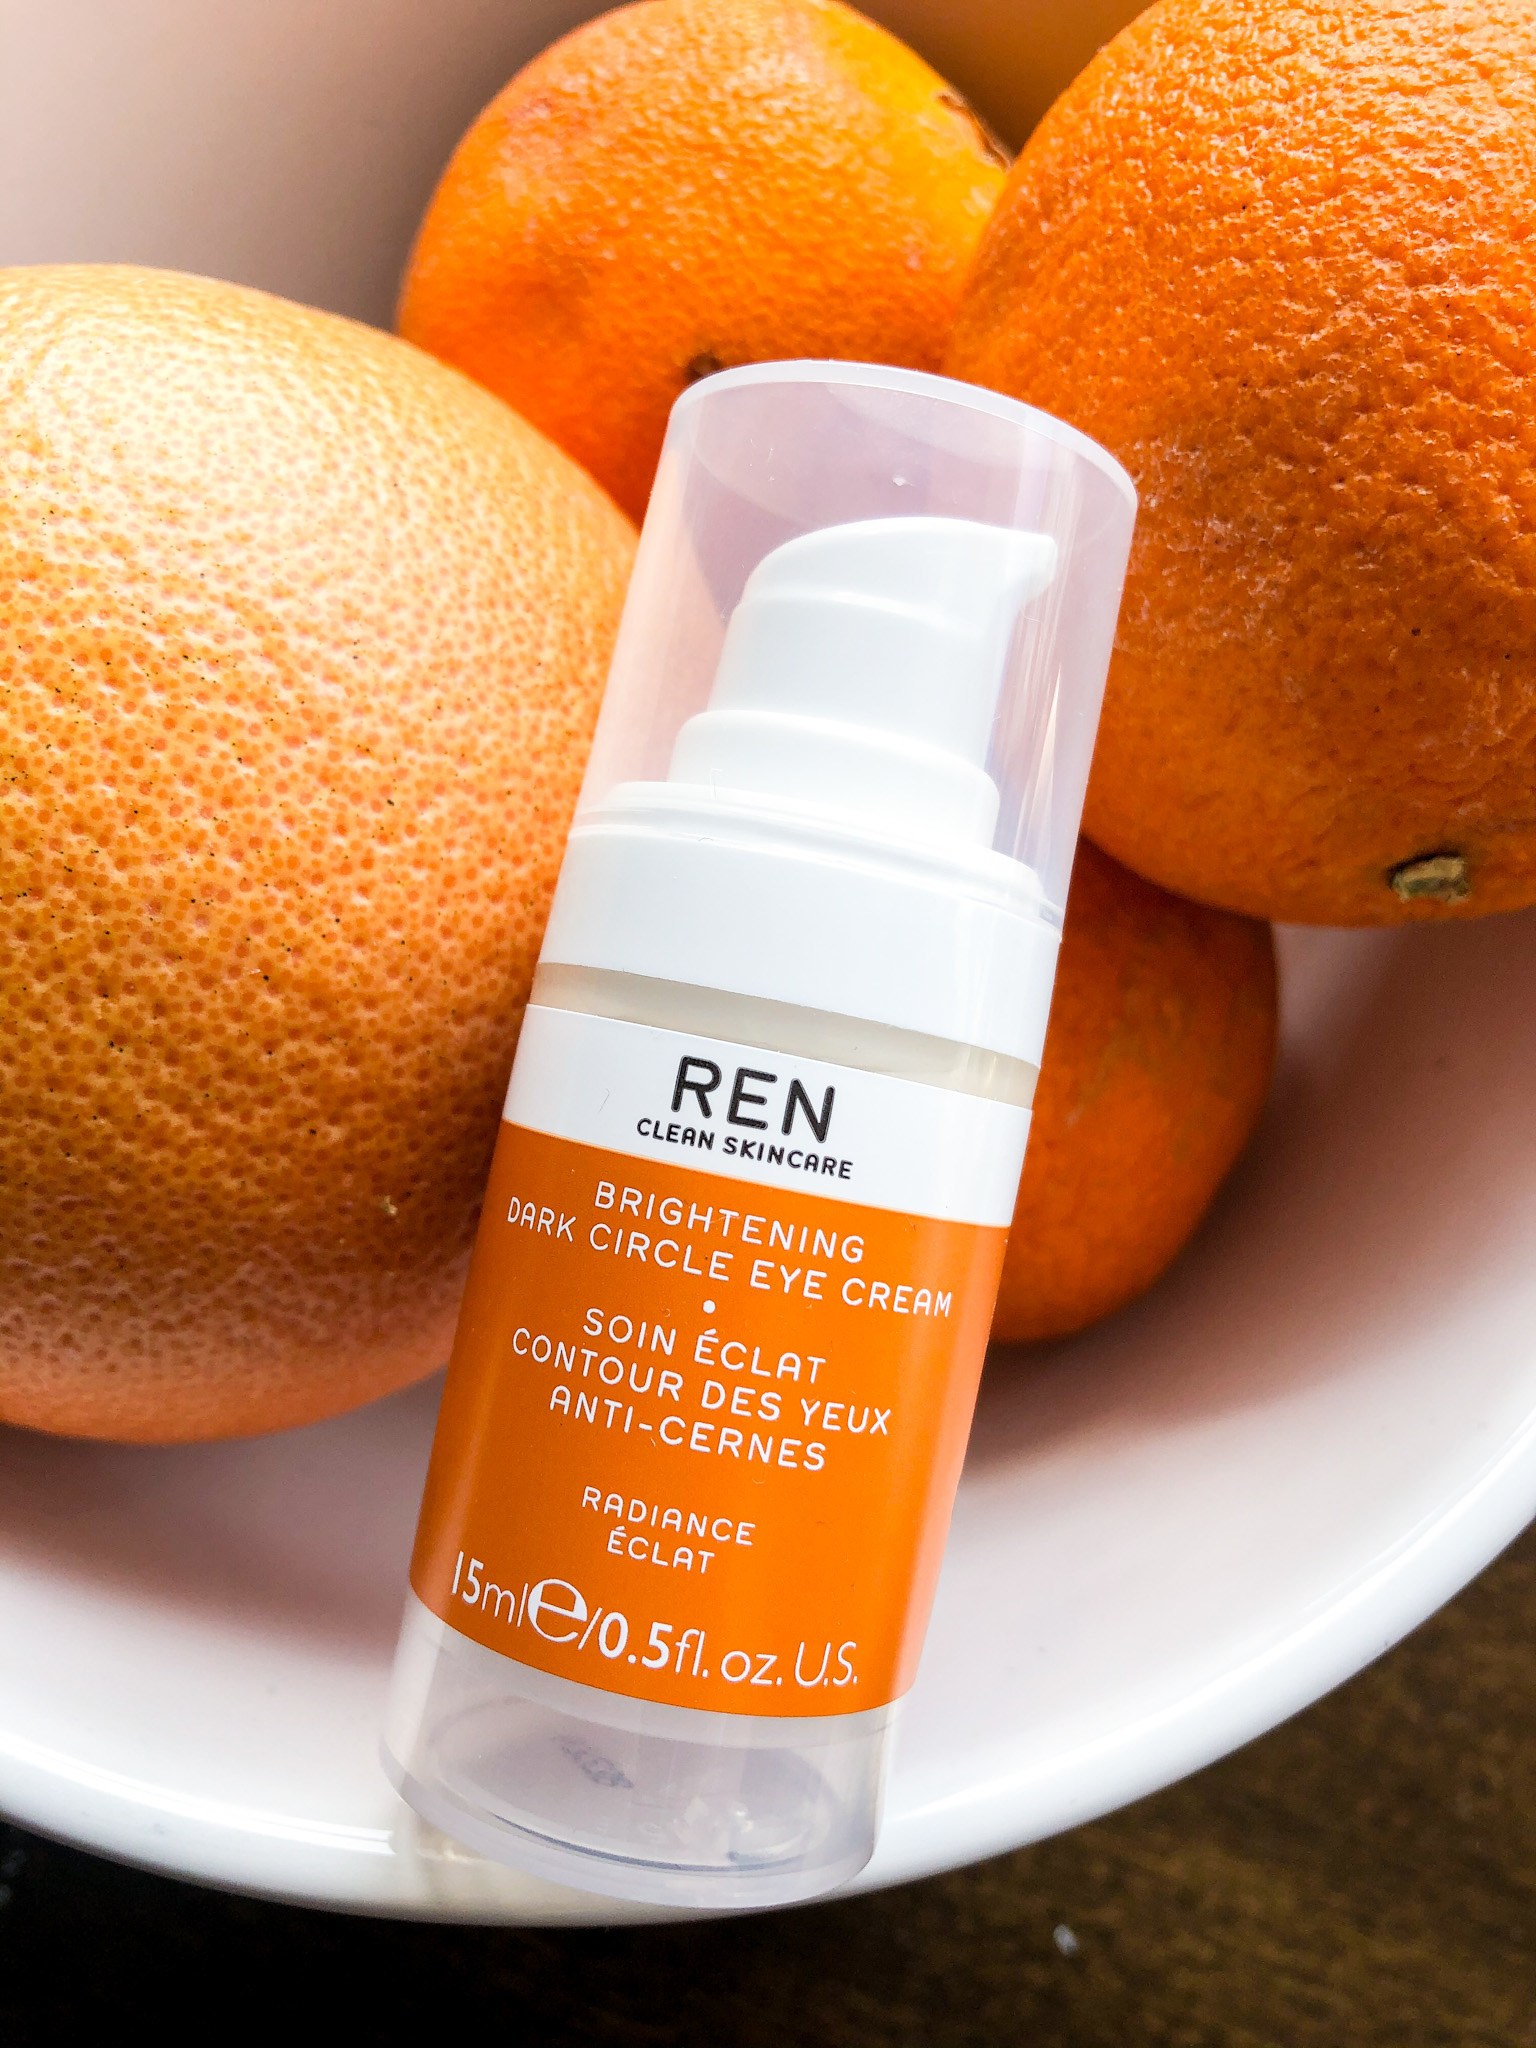 The eye cream nestled into a bowl of oranges